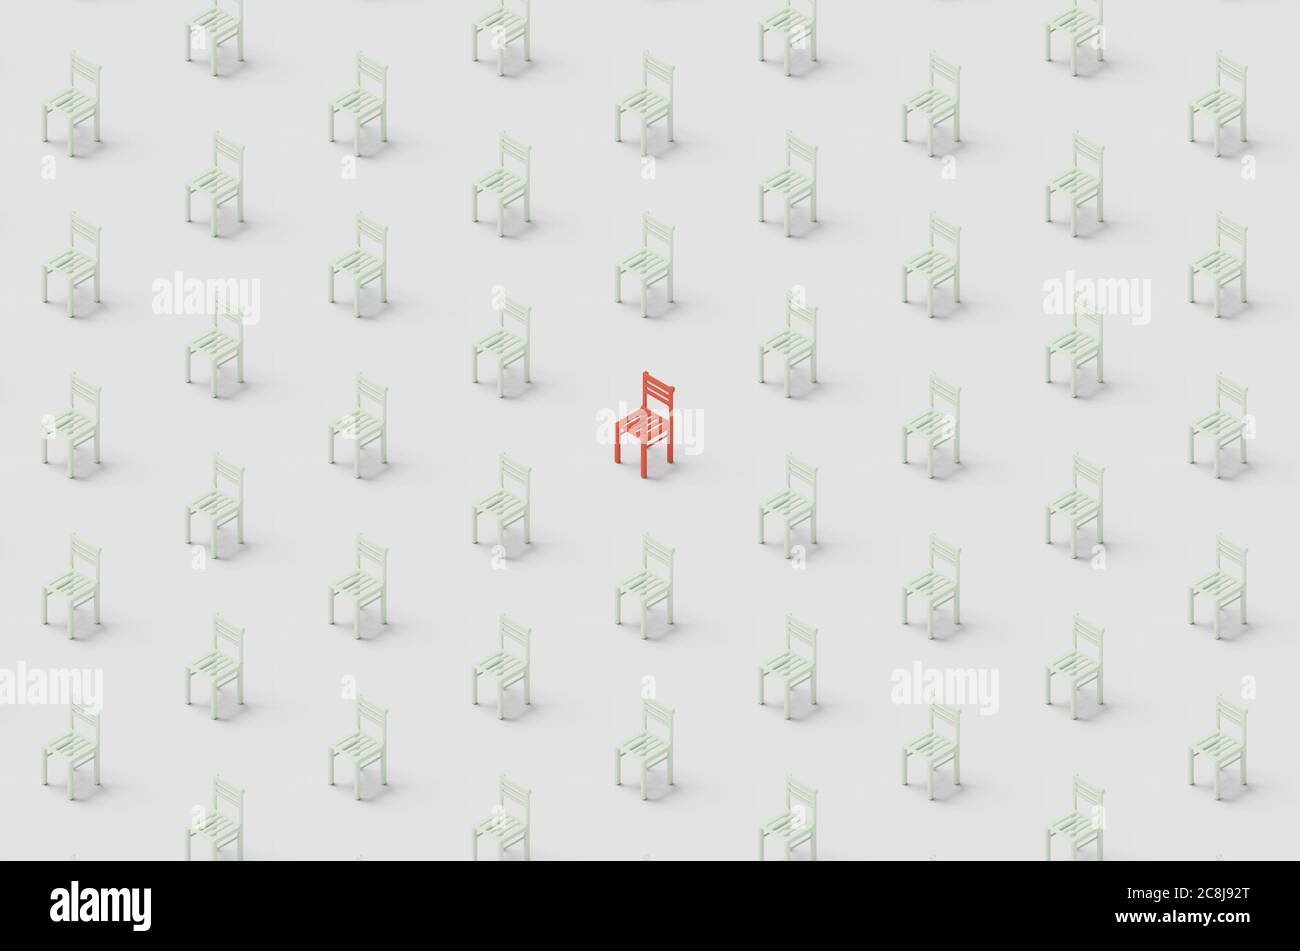 Seamless white chairs minimal pattern with one red seat, social distancing coronavirus individuality concept 3D rendering Stock Photo